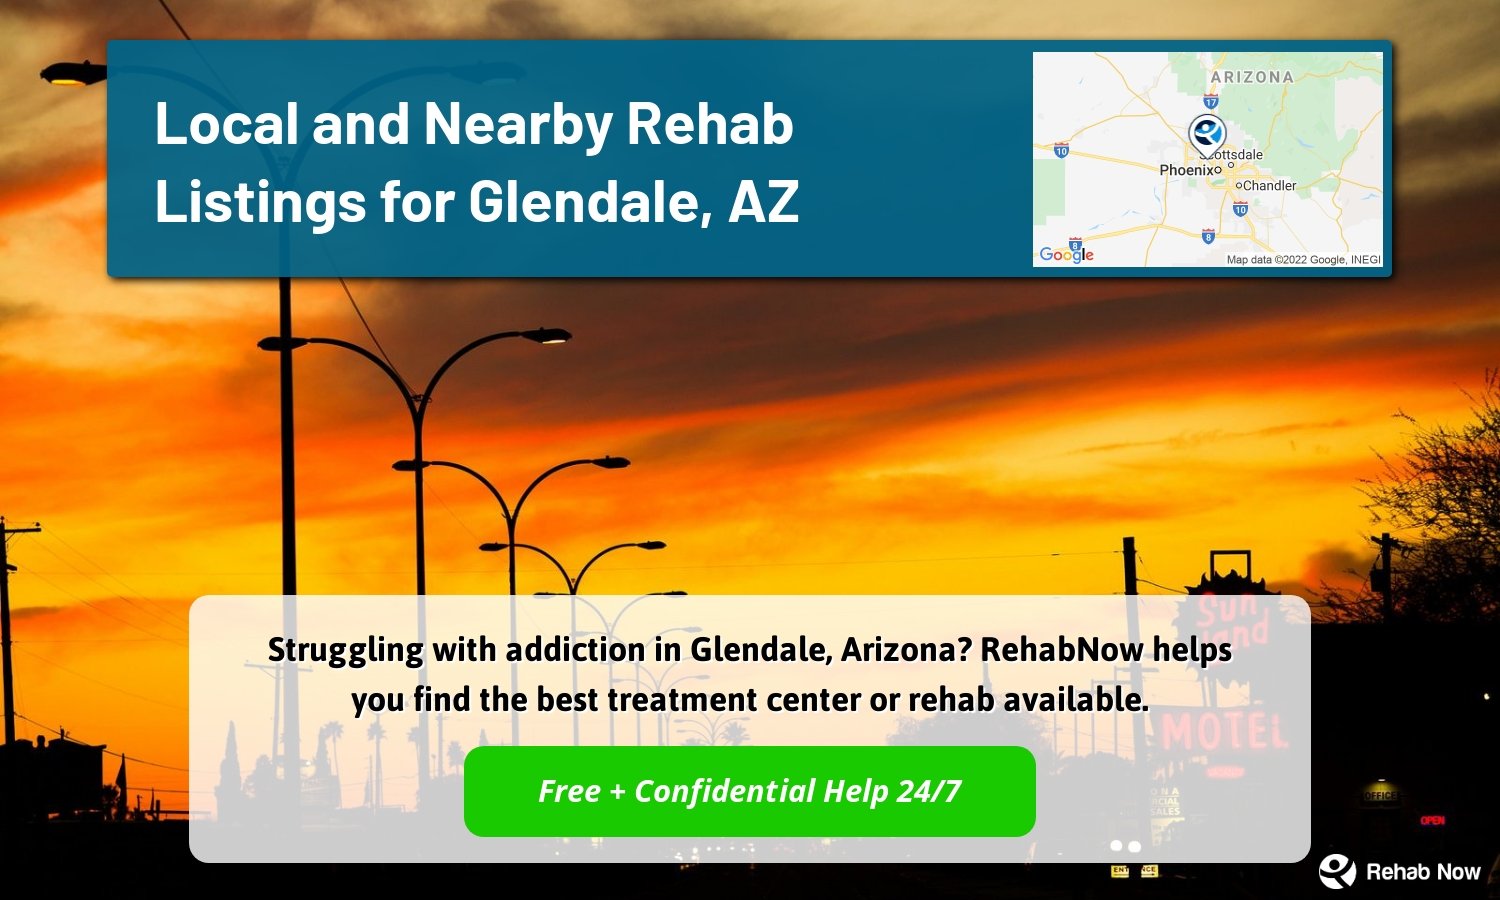 Struggling with addiction in Glendale, Arizona? RehabNow helps you find the best treatment center or rehab available.